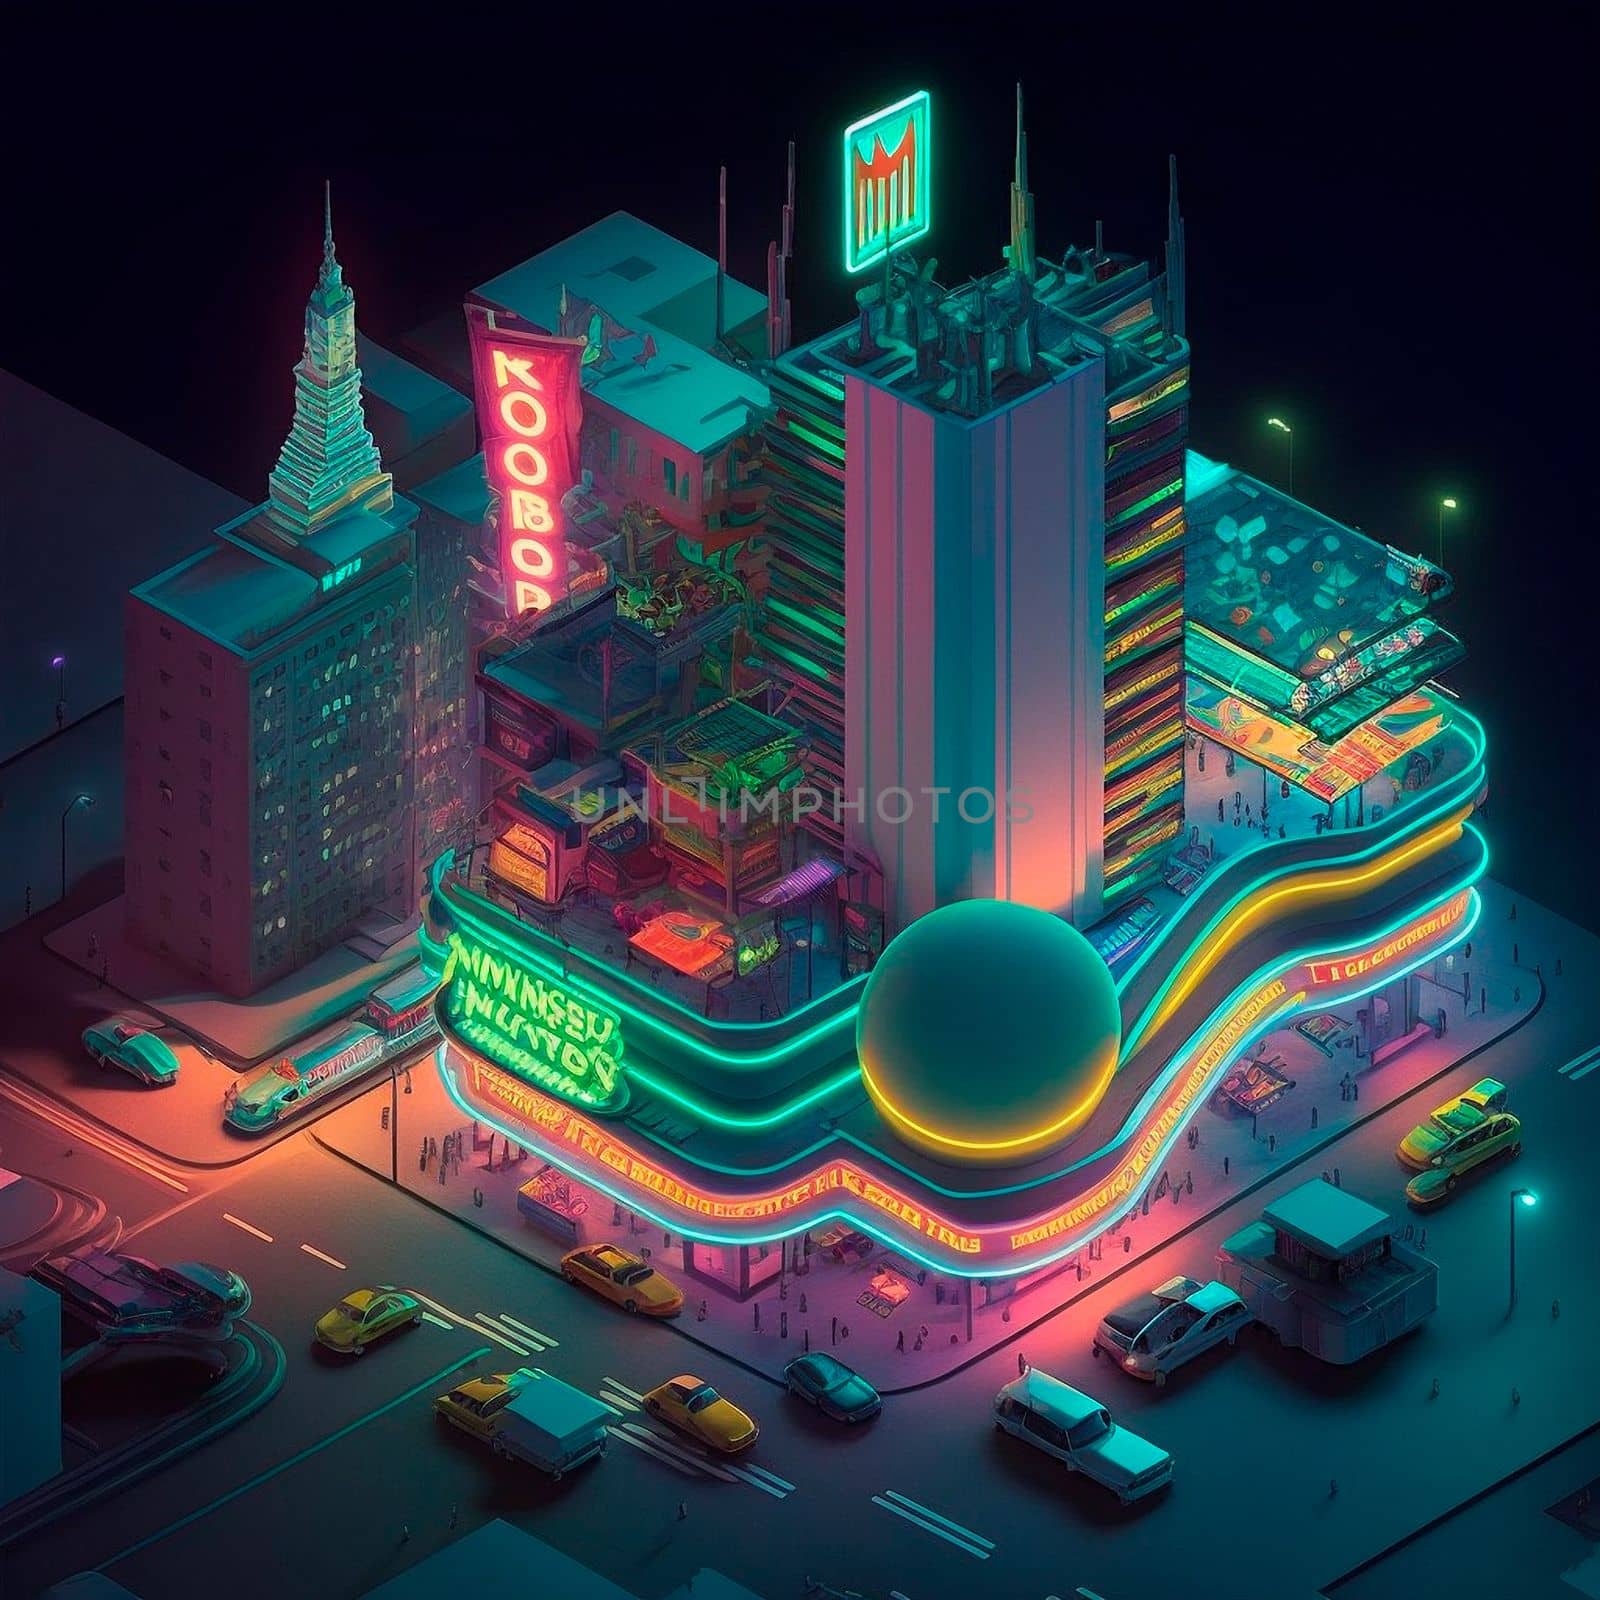 Life in the neon city at night. Bright lights, cars, cafes. Backlight, neon, isometry. High quality illustration